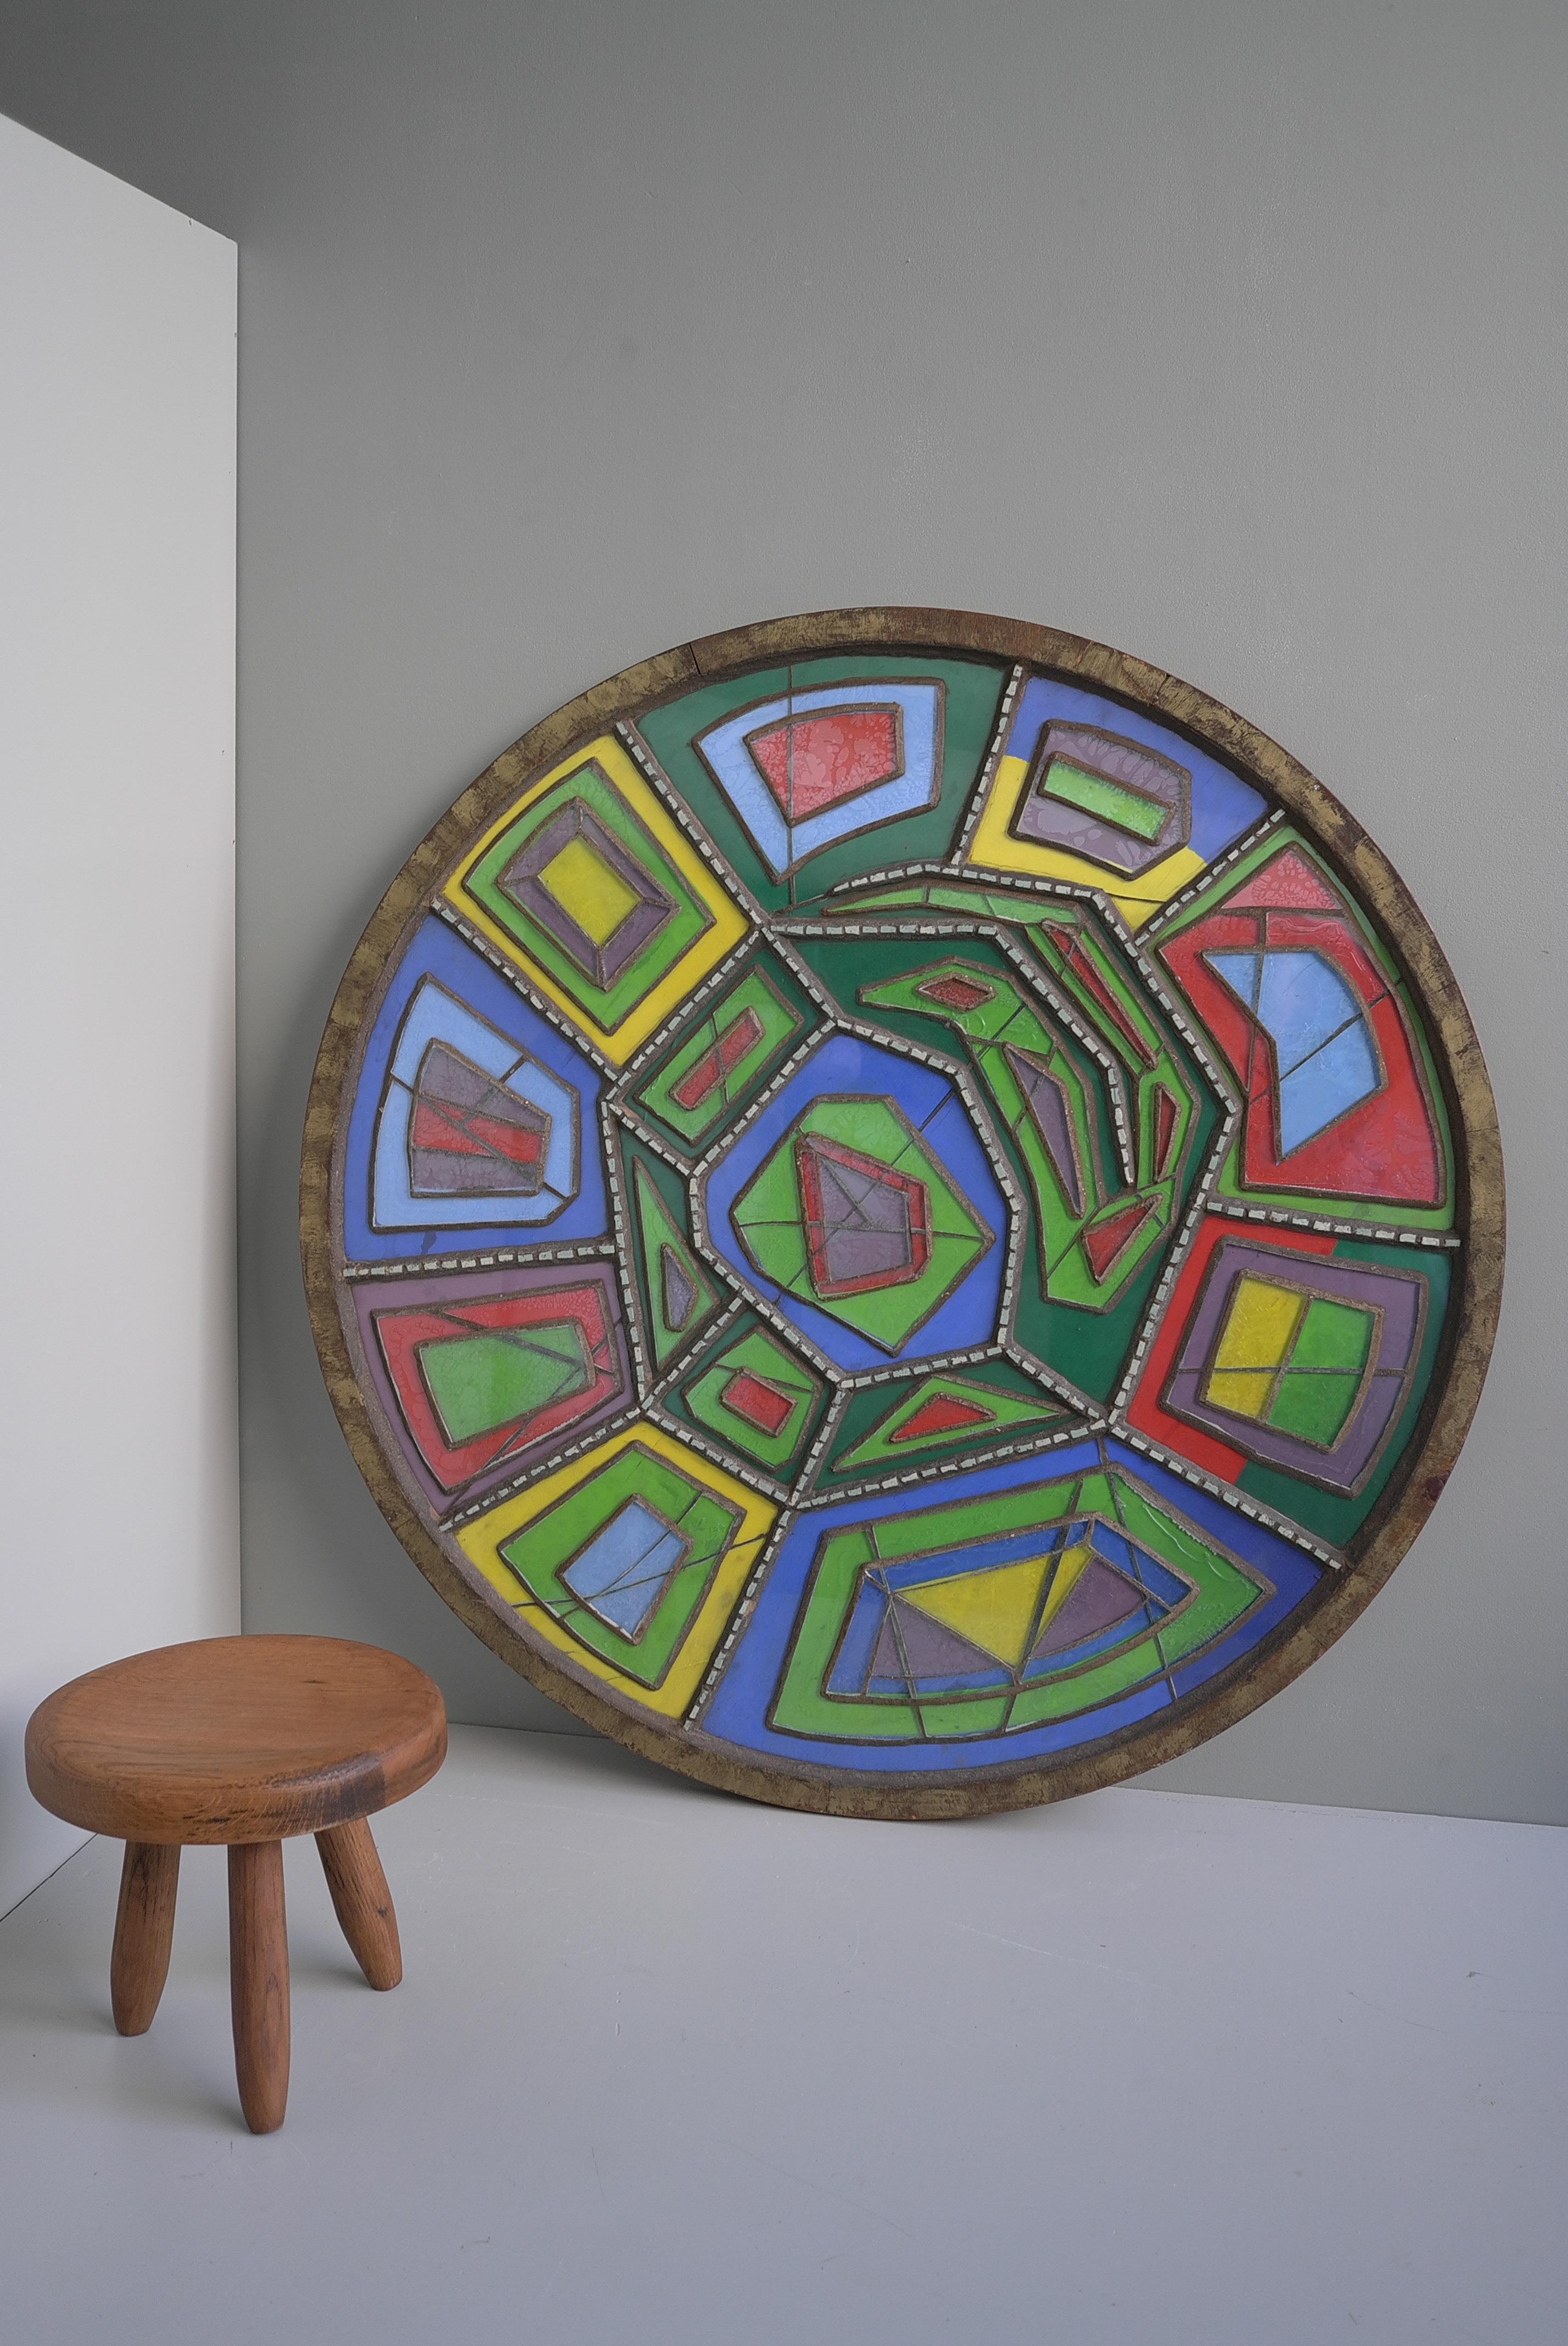 Large Midcentury Multicolored Round Glass and Concrete Wall Sculpture, 1950s For Sale 1